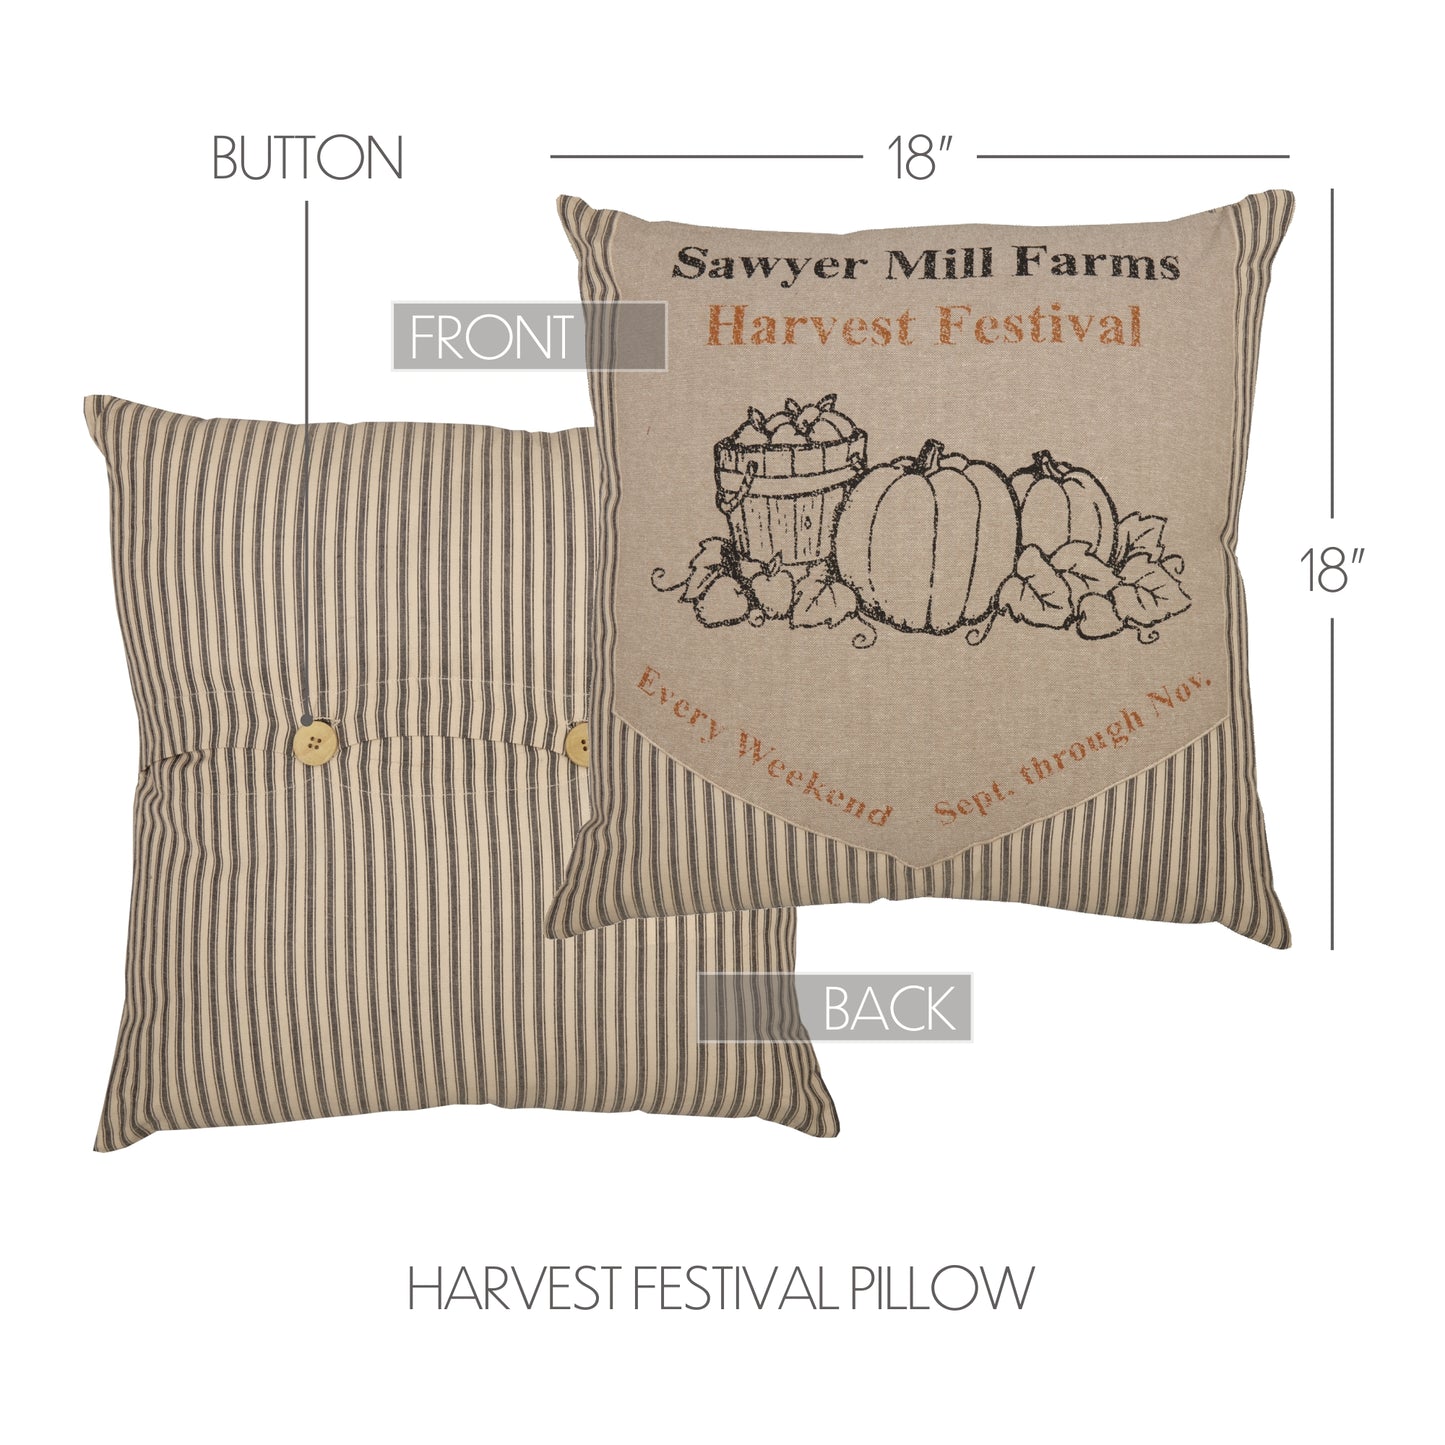 56774-Sawyer-Mill-Charcoal-Harvest-Festival-Pillow-18x18-image-1